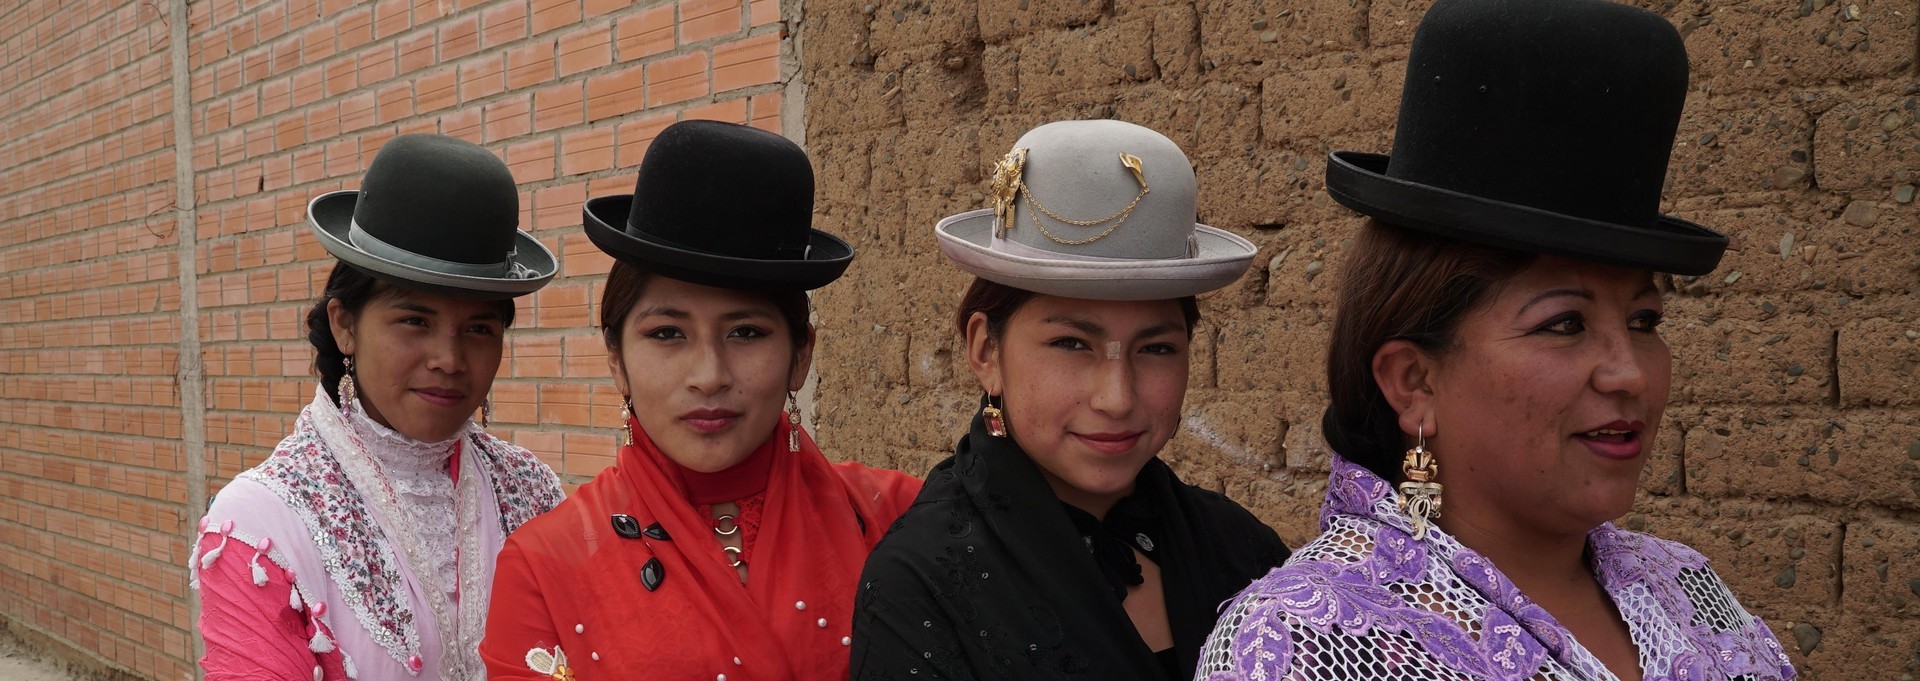 Professional wrestling Bolivian style: Meet the indigenous women who light ...